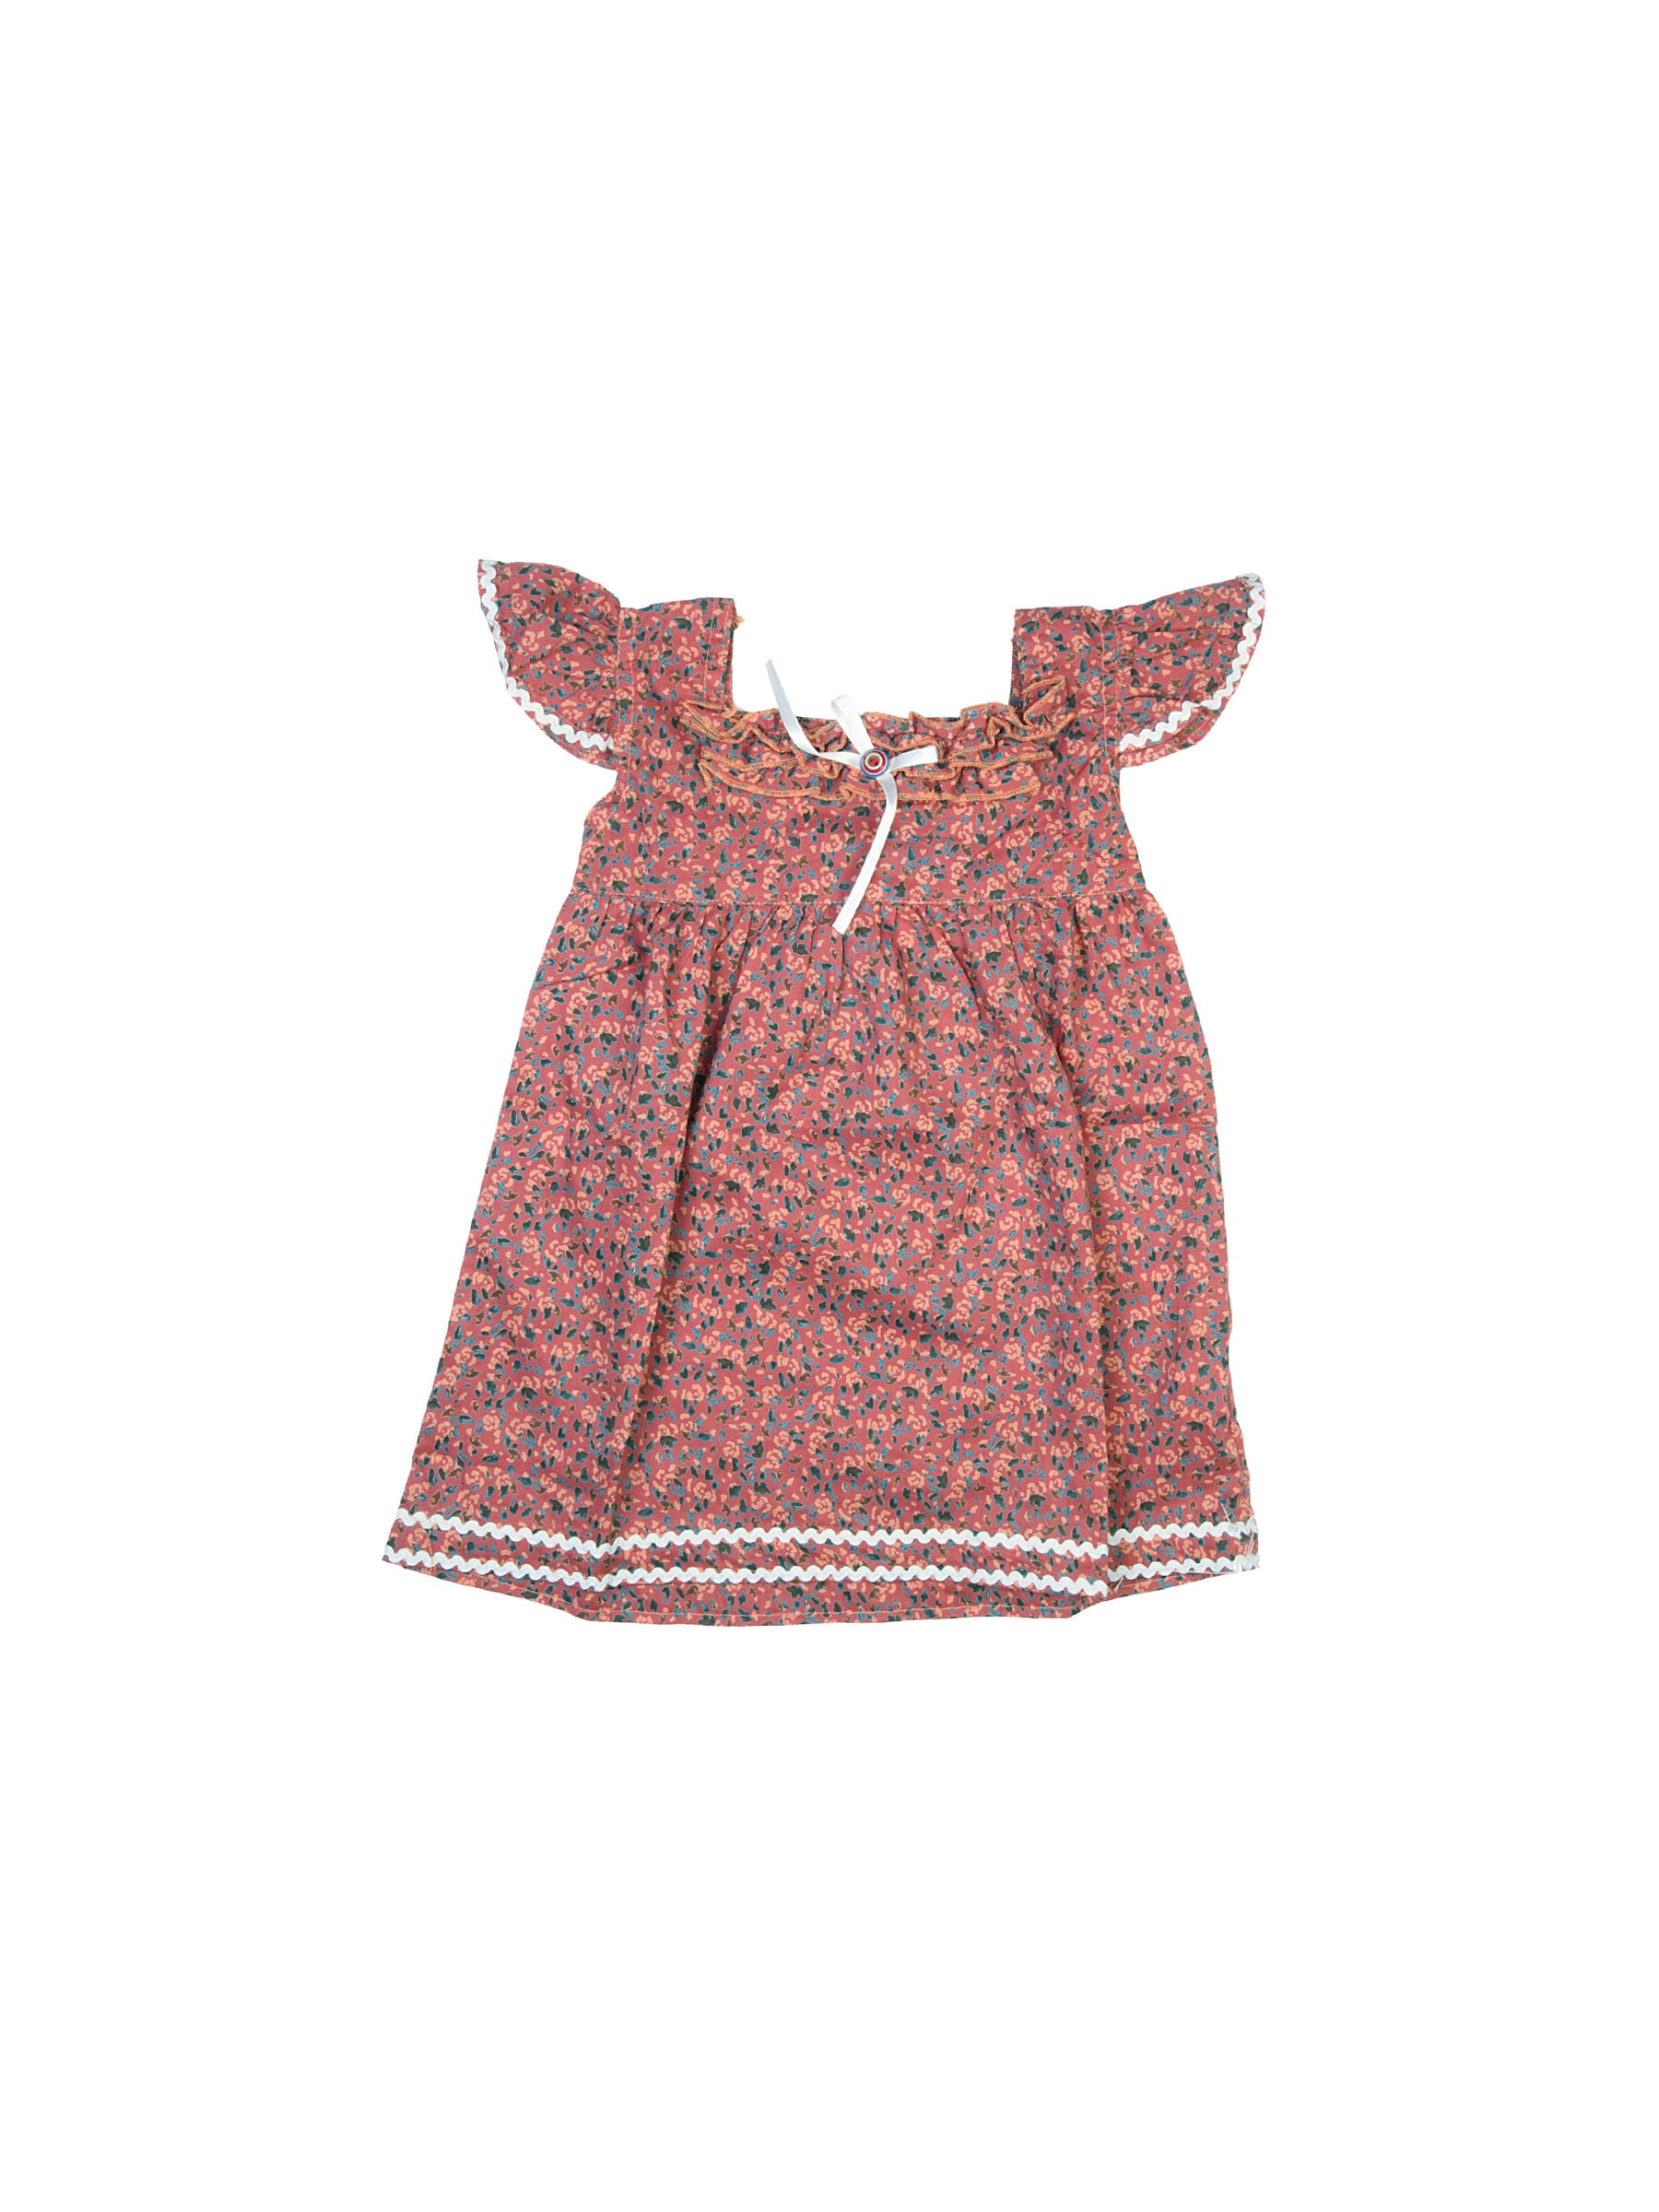 Ant Kids Button Bow Pink Dresses